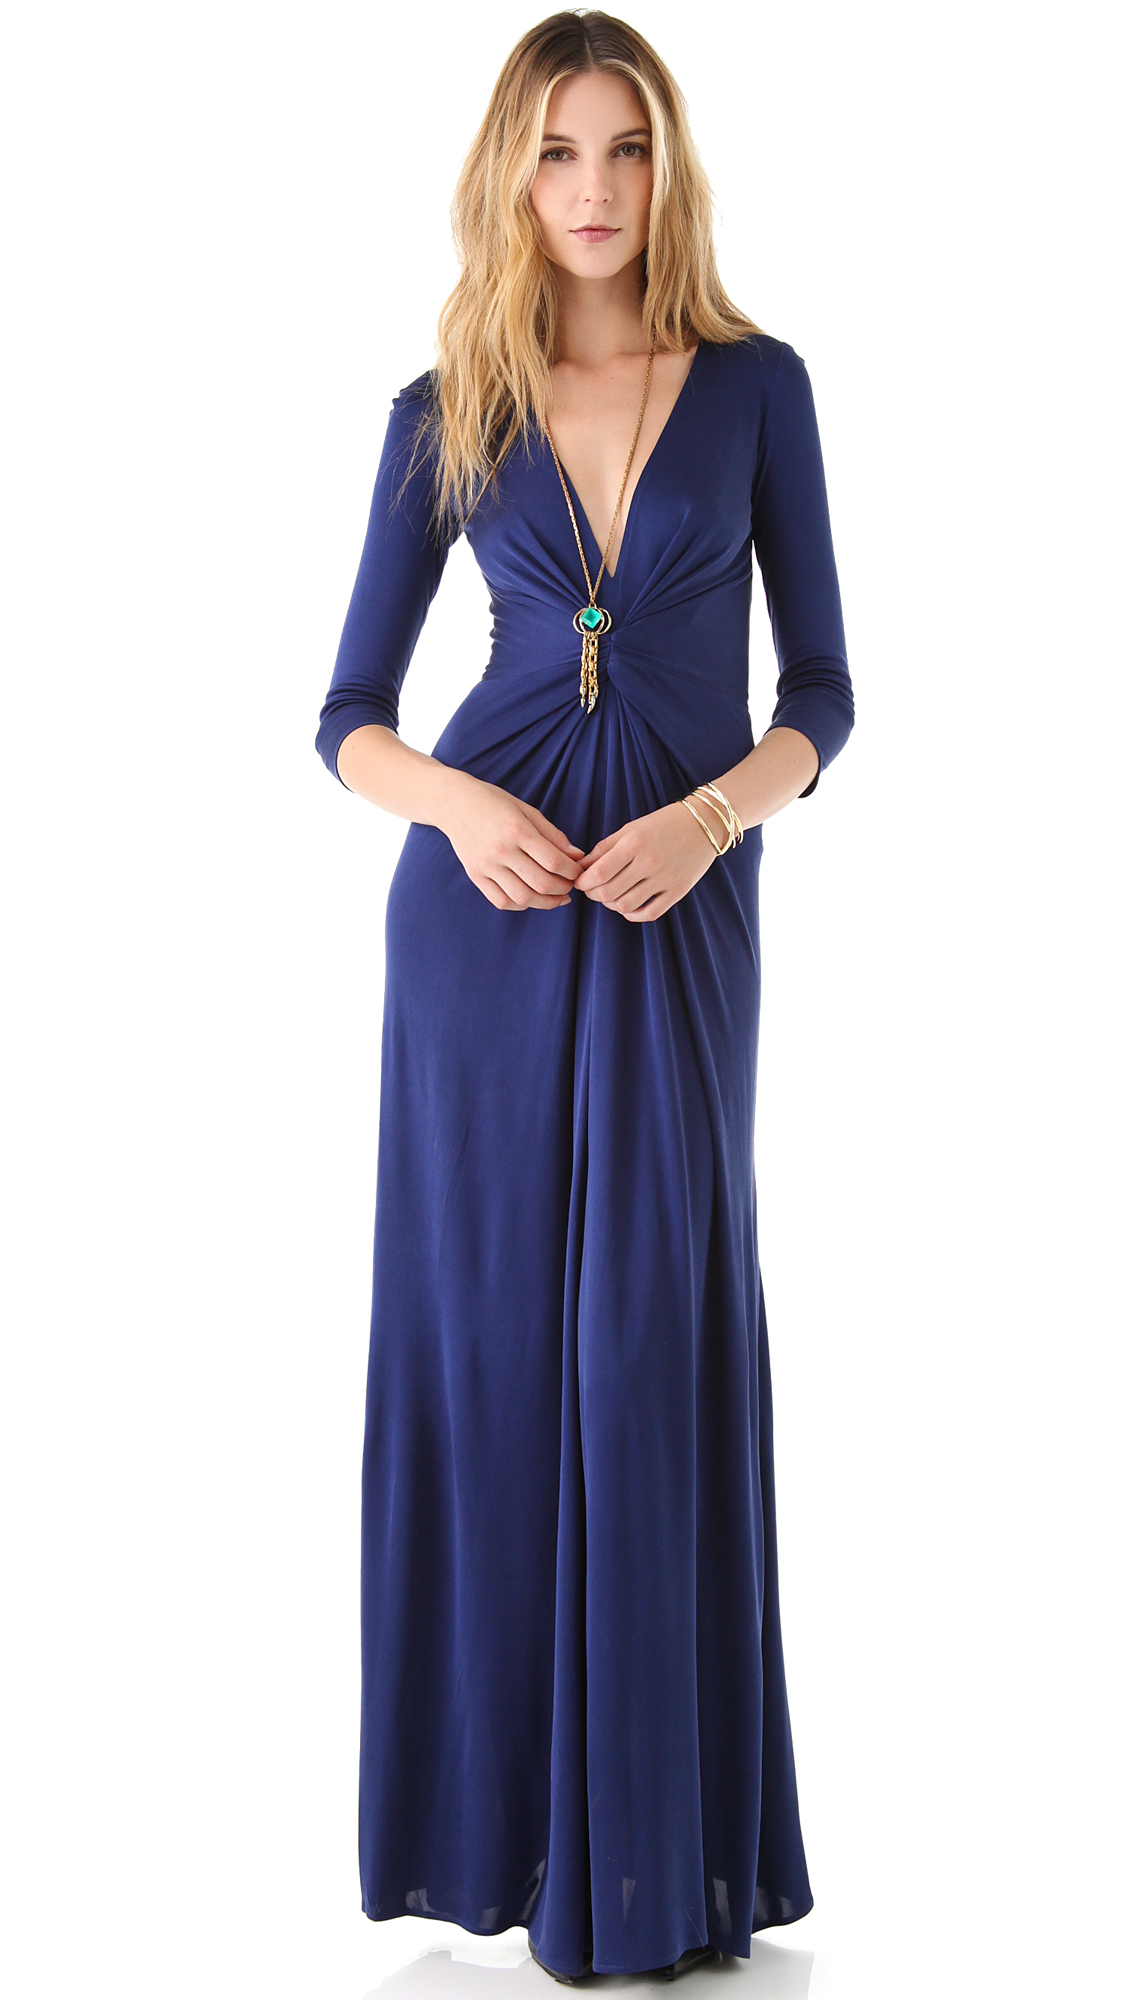 Lyst - Issa V Neck Long Sleeve Gown in Blue